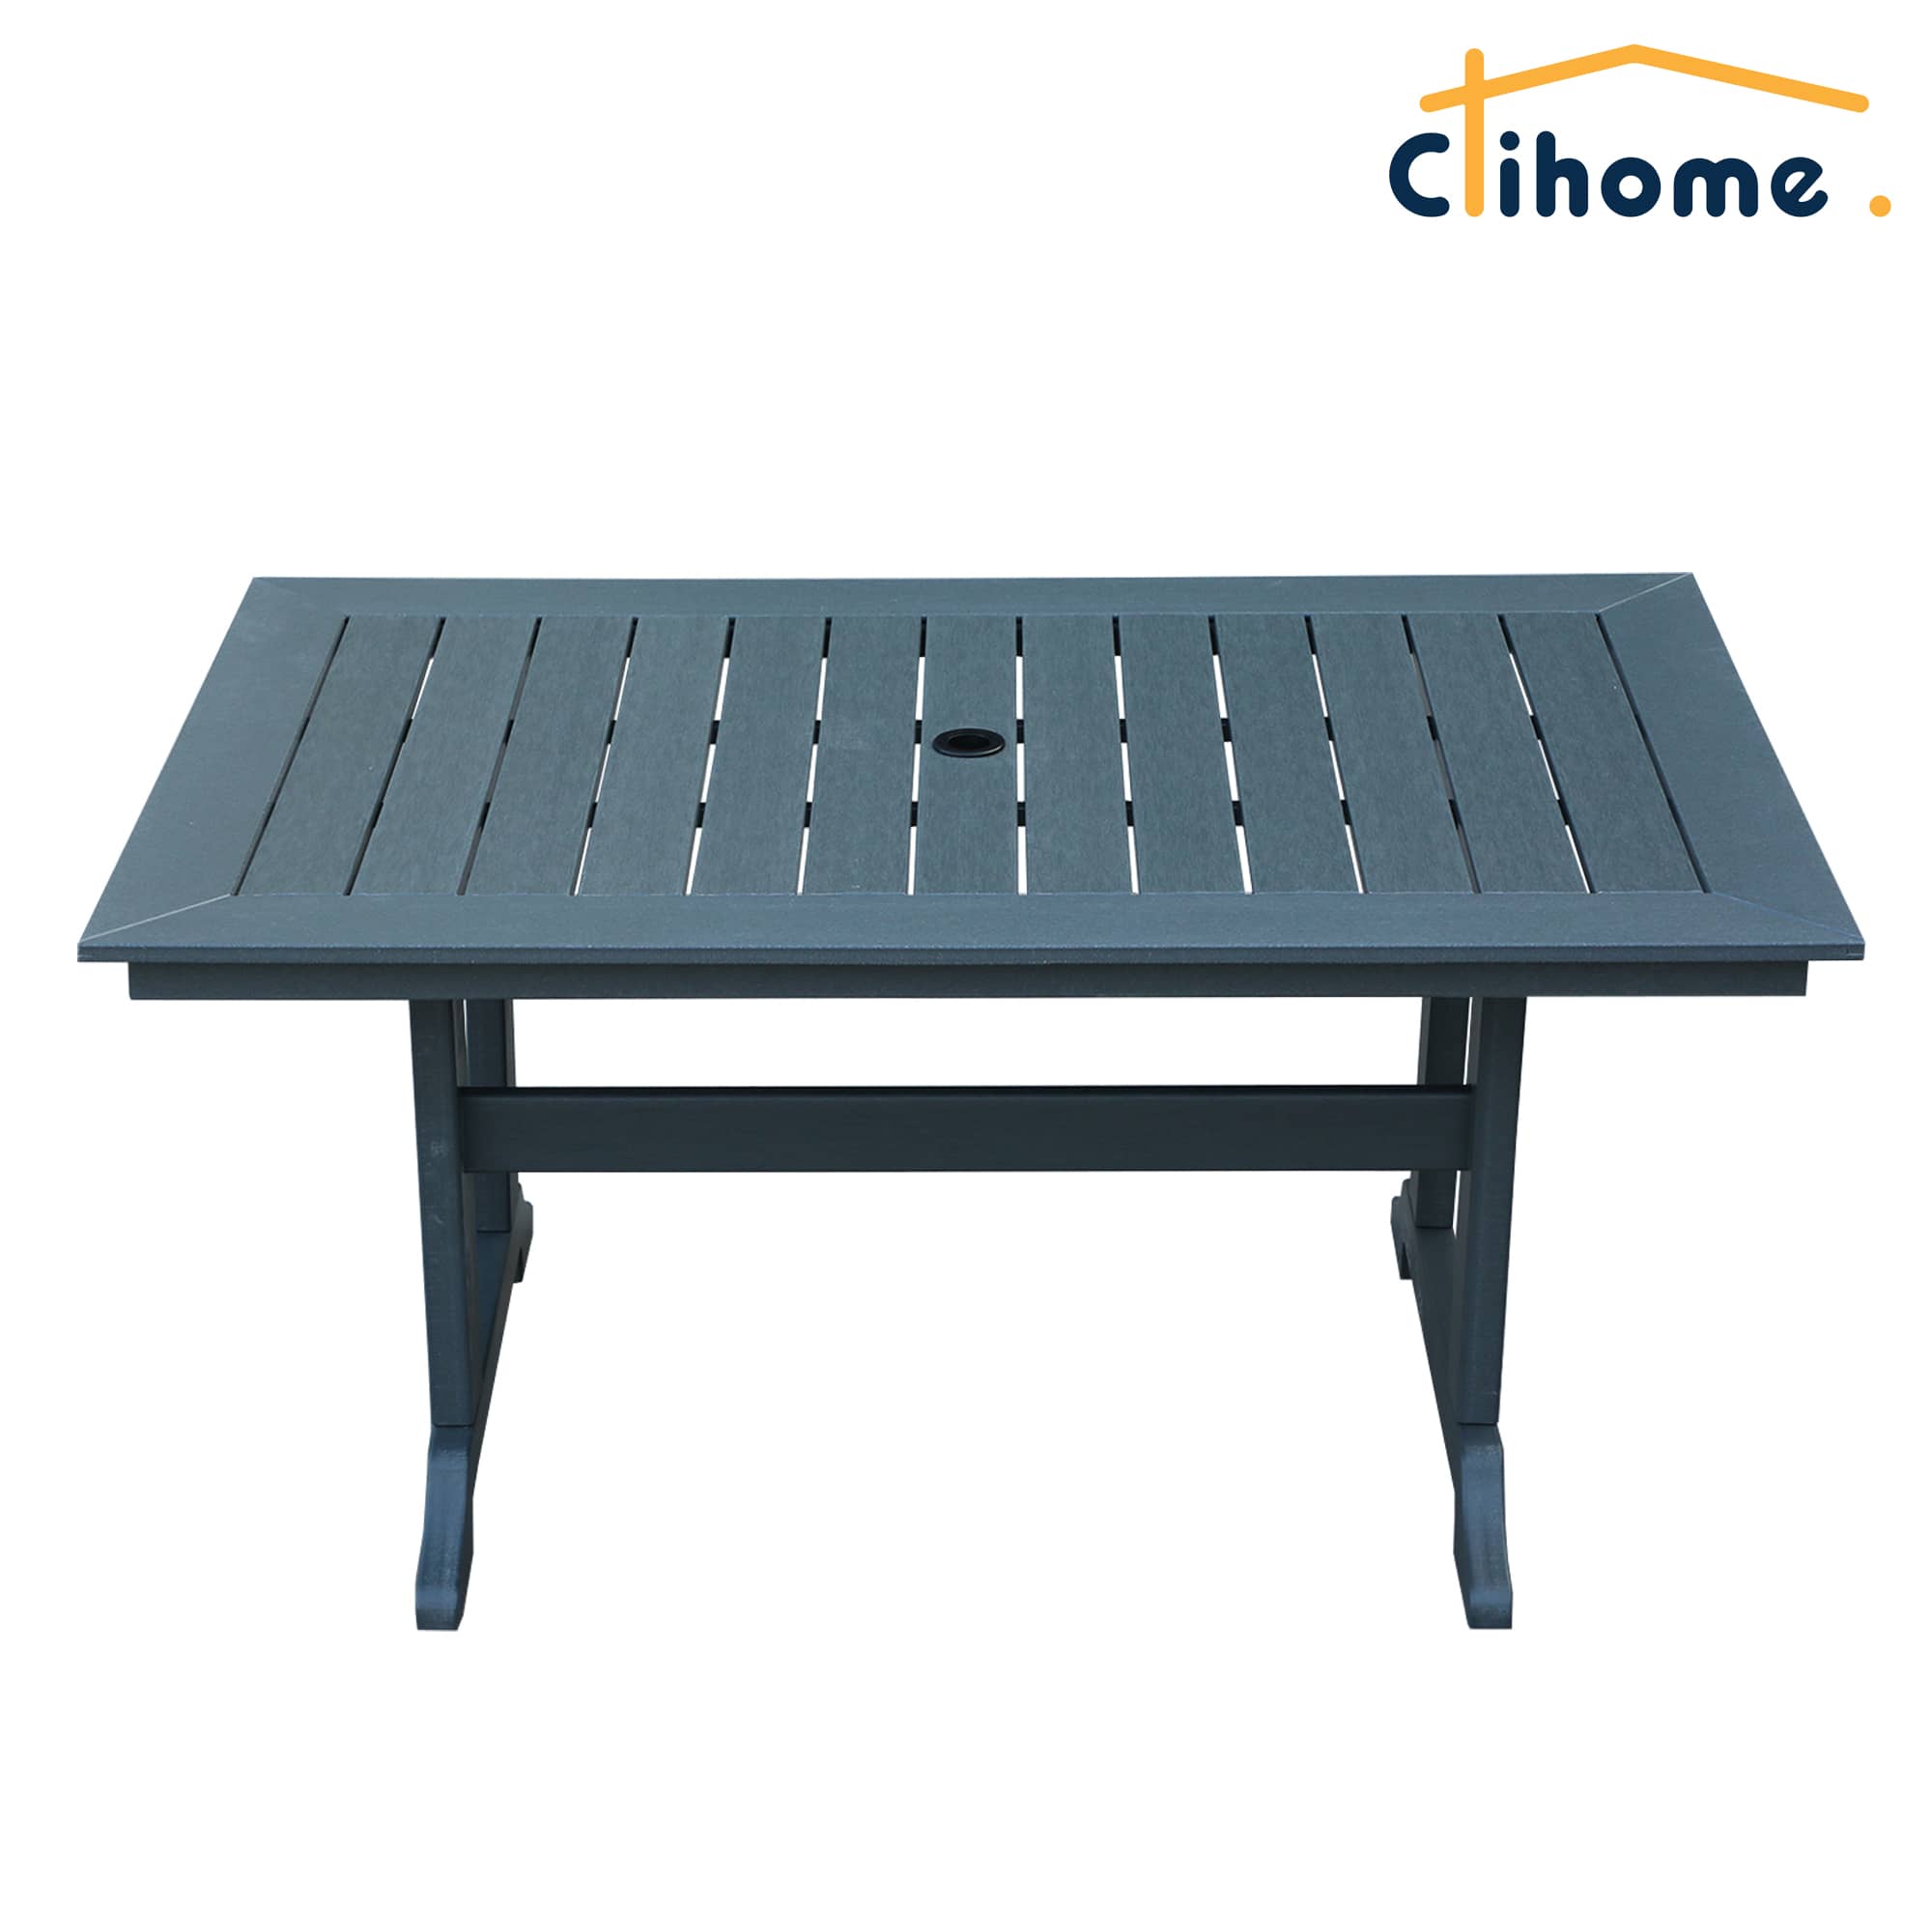 Clihome 60.2" Outdoor Patio Rectangular Dining Table